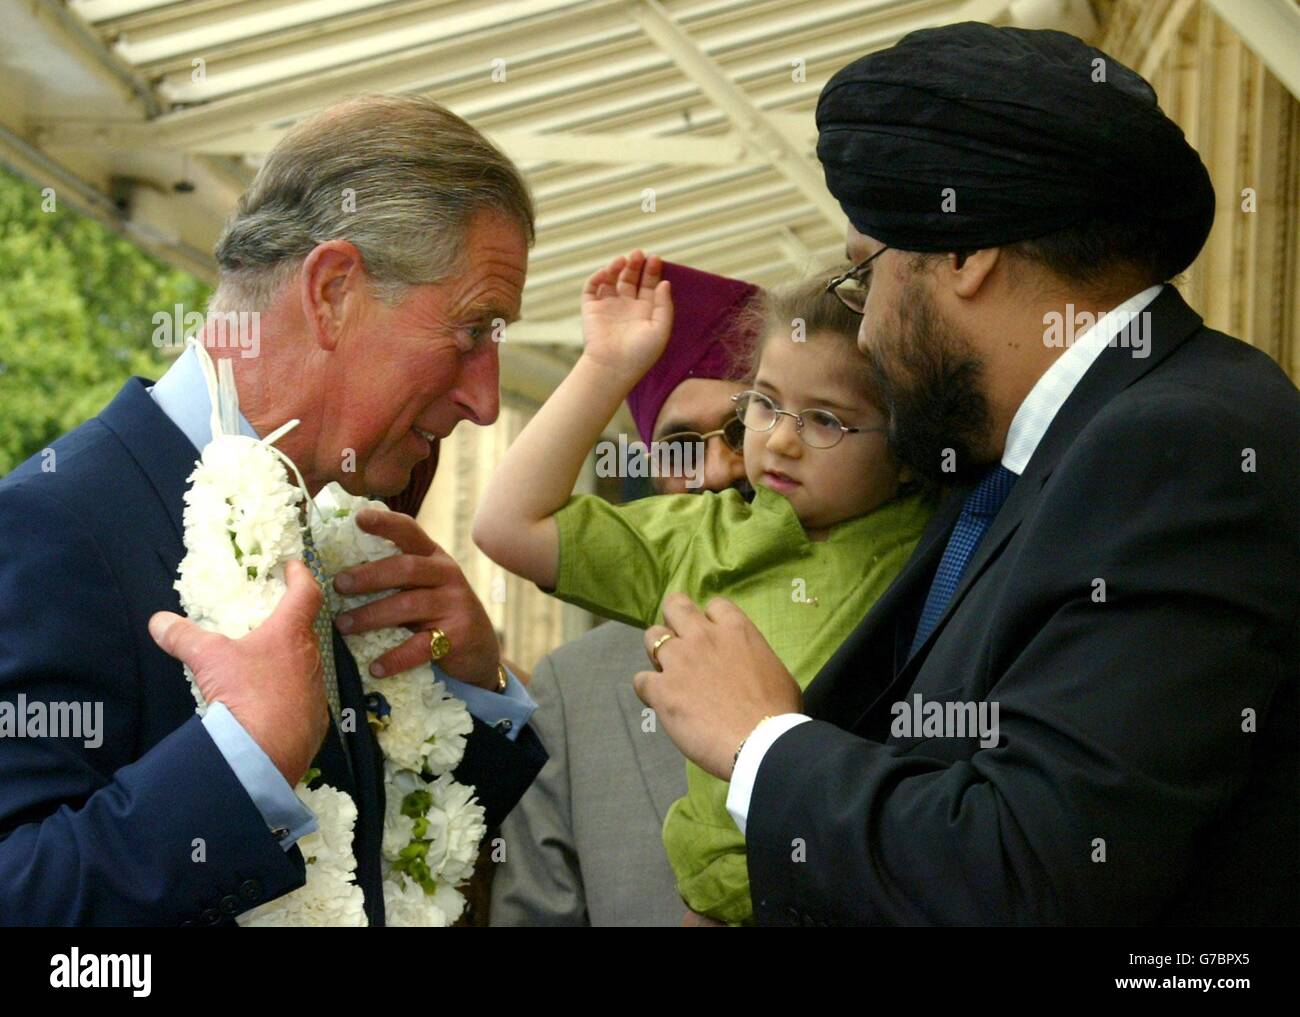 Britain's Prince Charles (left) is presented with a haar by 4-year-old Tauleen, as she is held by her father Dr Balwinder Singh (right), as he arrives for a celebration of the 400th anniversary of the first reading of the Guru Granth Sahib Sikh Scriptures at the Royal Albert Hall in London. The event was organised by the Network of Sikh Organisations to commemorate the 400th year of the Sikh holy book, the Guru Granth Sahib, a collection of the verses of the Sikh Gurus. Stock Photo